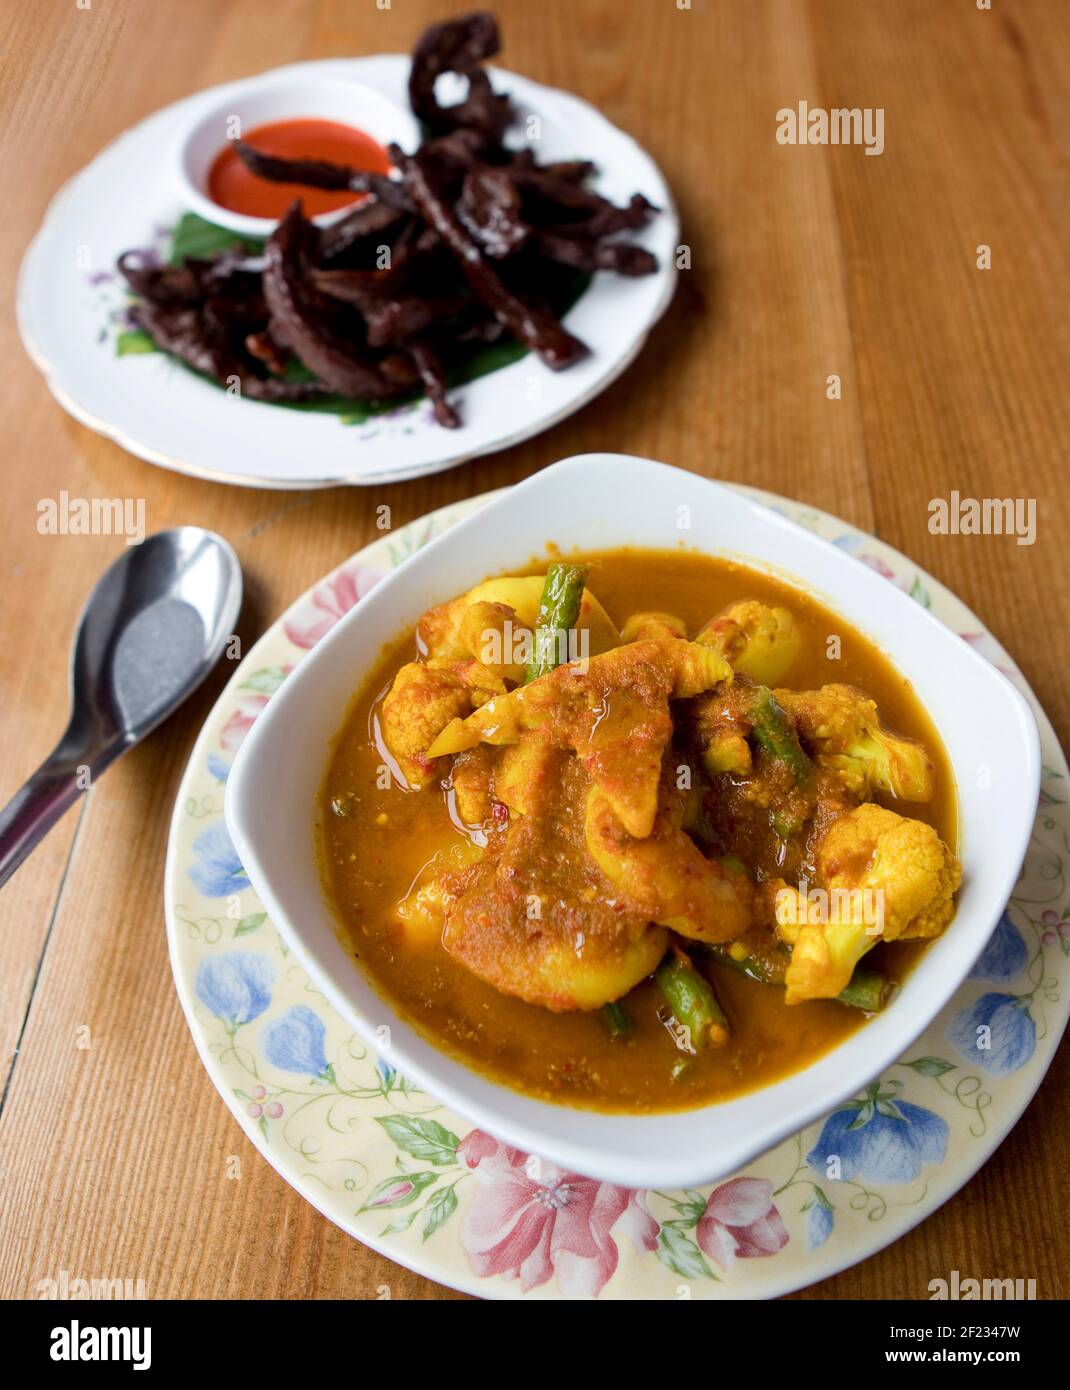 101 Thai Kitchen Pic Shows:  Sour Prawn Curry with Salted Beef Side Stock Photo